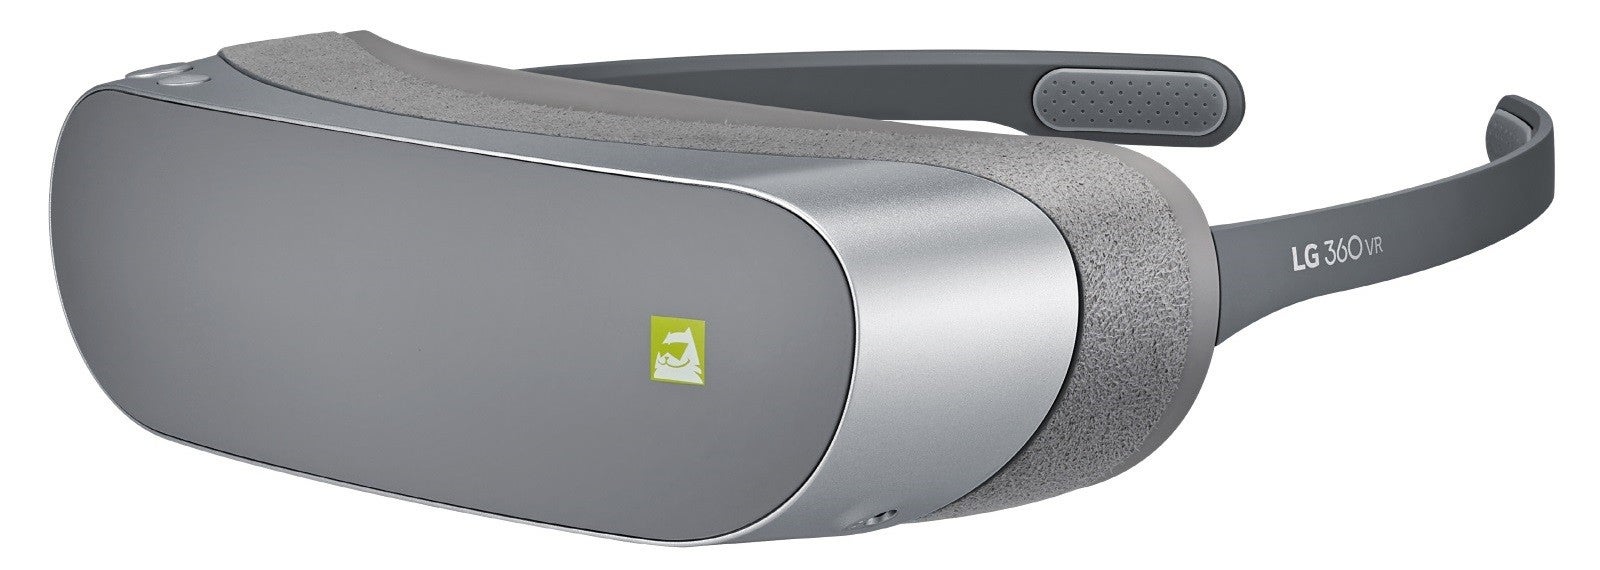 LG&#039;s own VR headset. - LG G5 announced, rocking a metal body and unique modular design